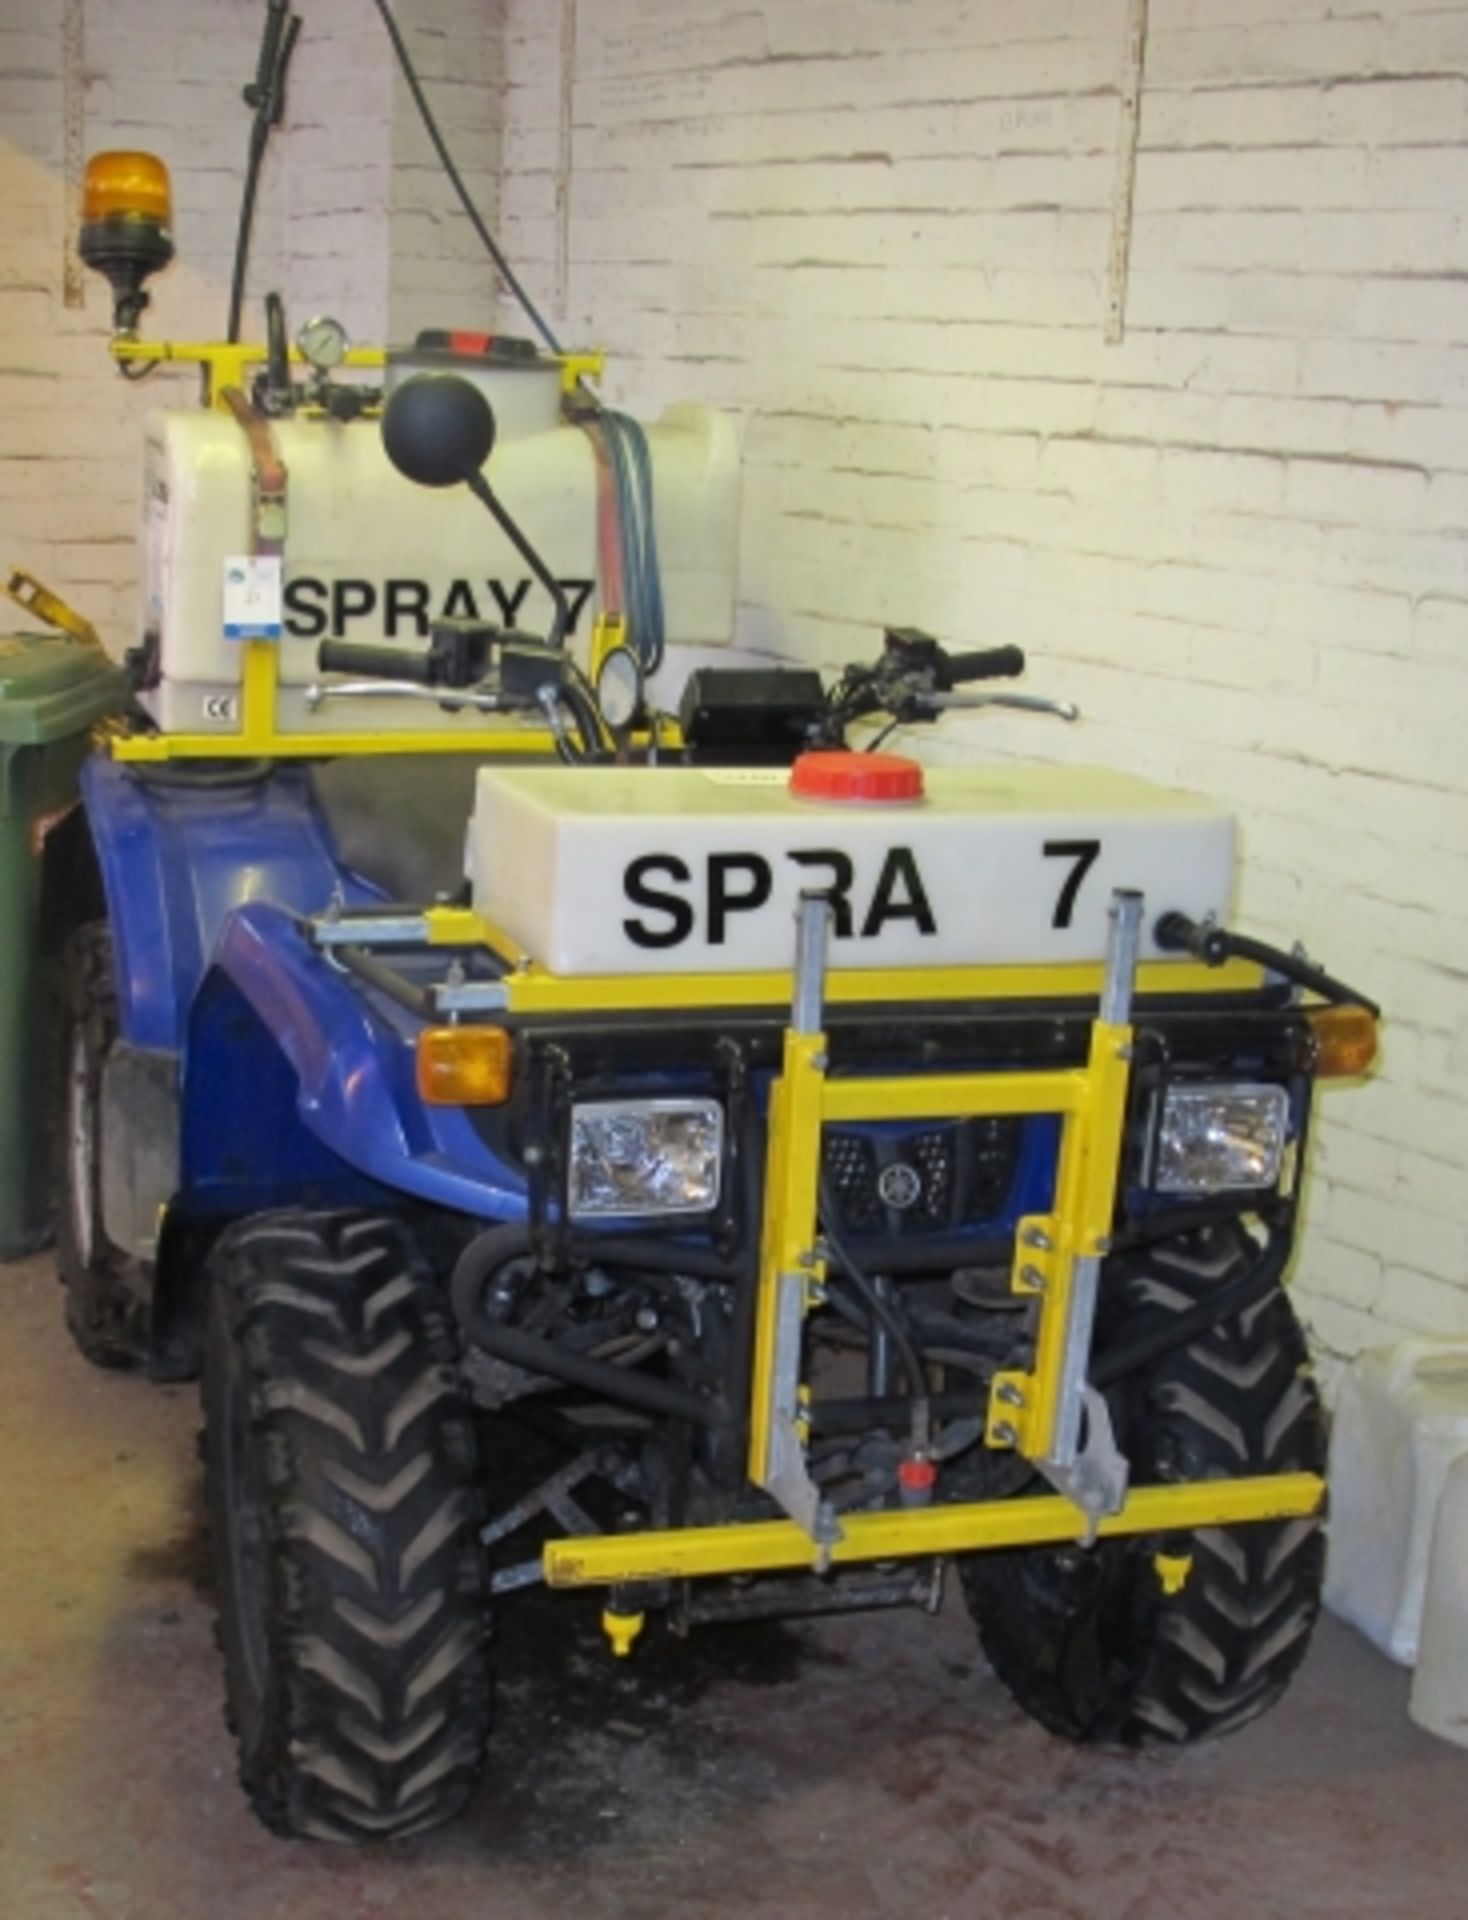 * 2008 Yamaha Grizzly Ultramatic 350 2WD Quad Bike fitted with Vale Engineering (York) Spray